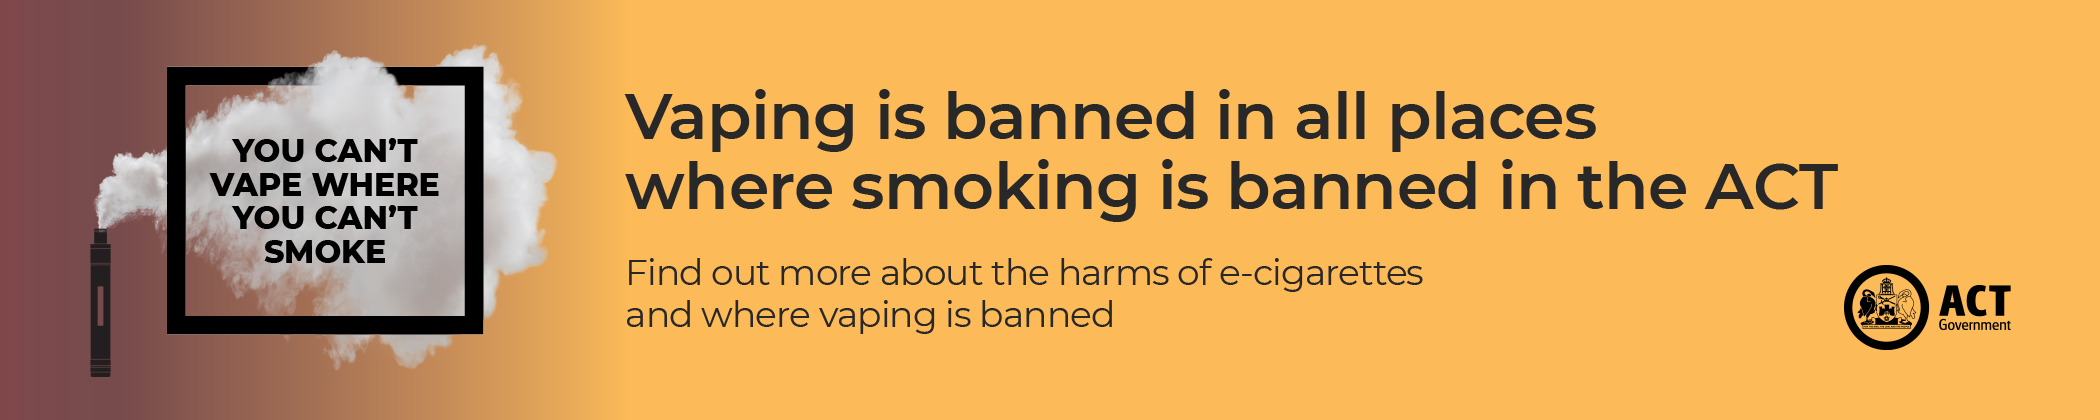 Vaping is banned in all places where smoking is banned in the ACT. Find out more about the harms of e-cigarettes and where vaping is banned. 